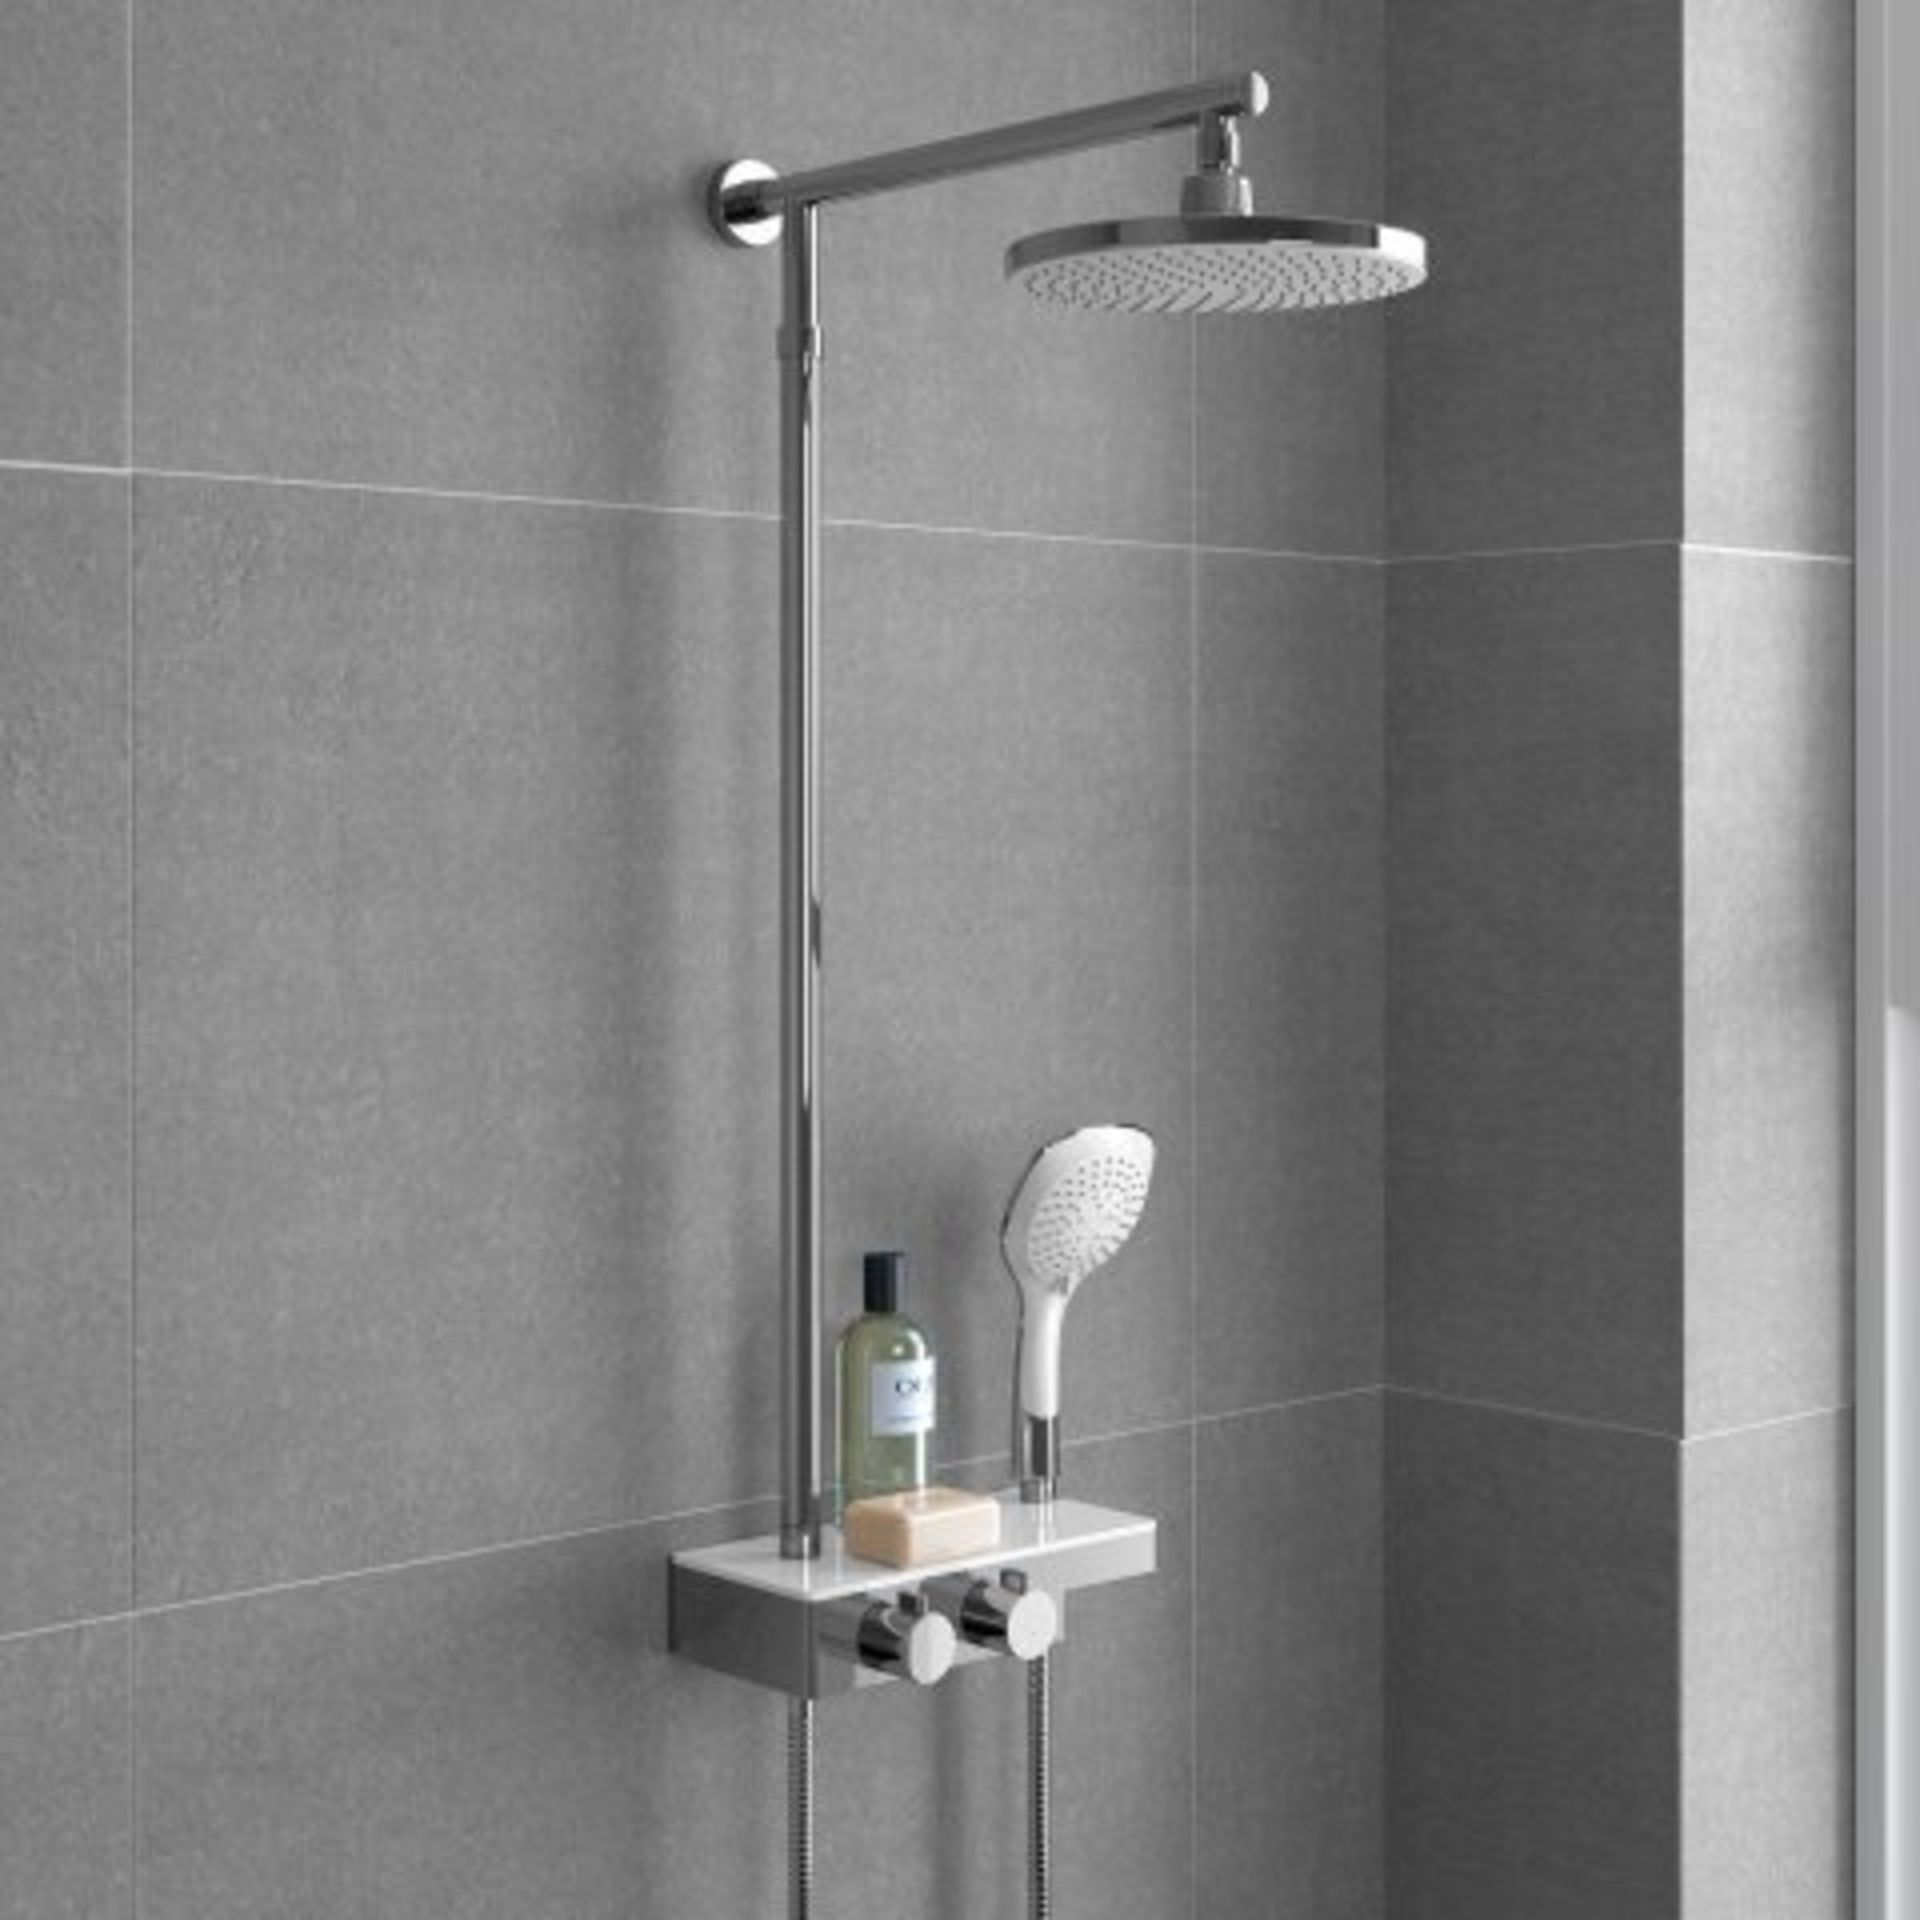 (I53) Round Exposed Thermostatic Mixer Shower Kit, Large Shower Head & Shelf RRP £349.99 Flaunting a - Image 2 of 4